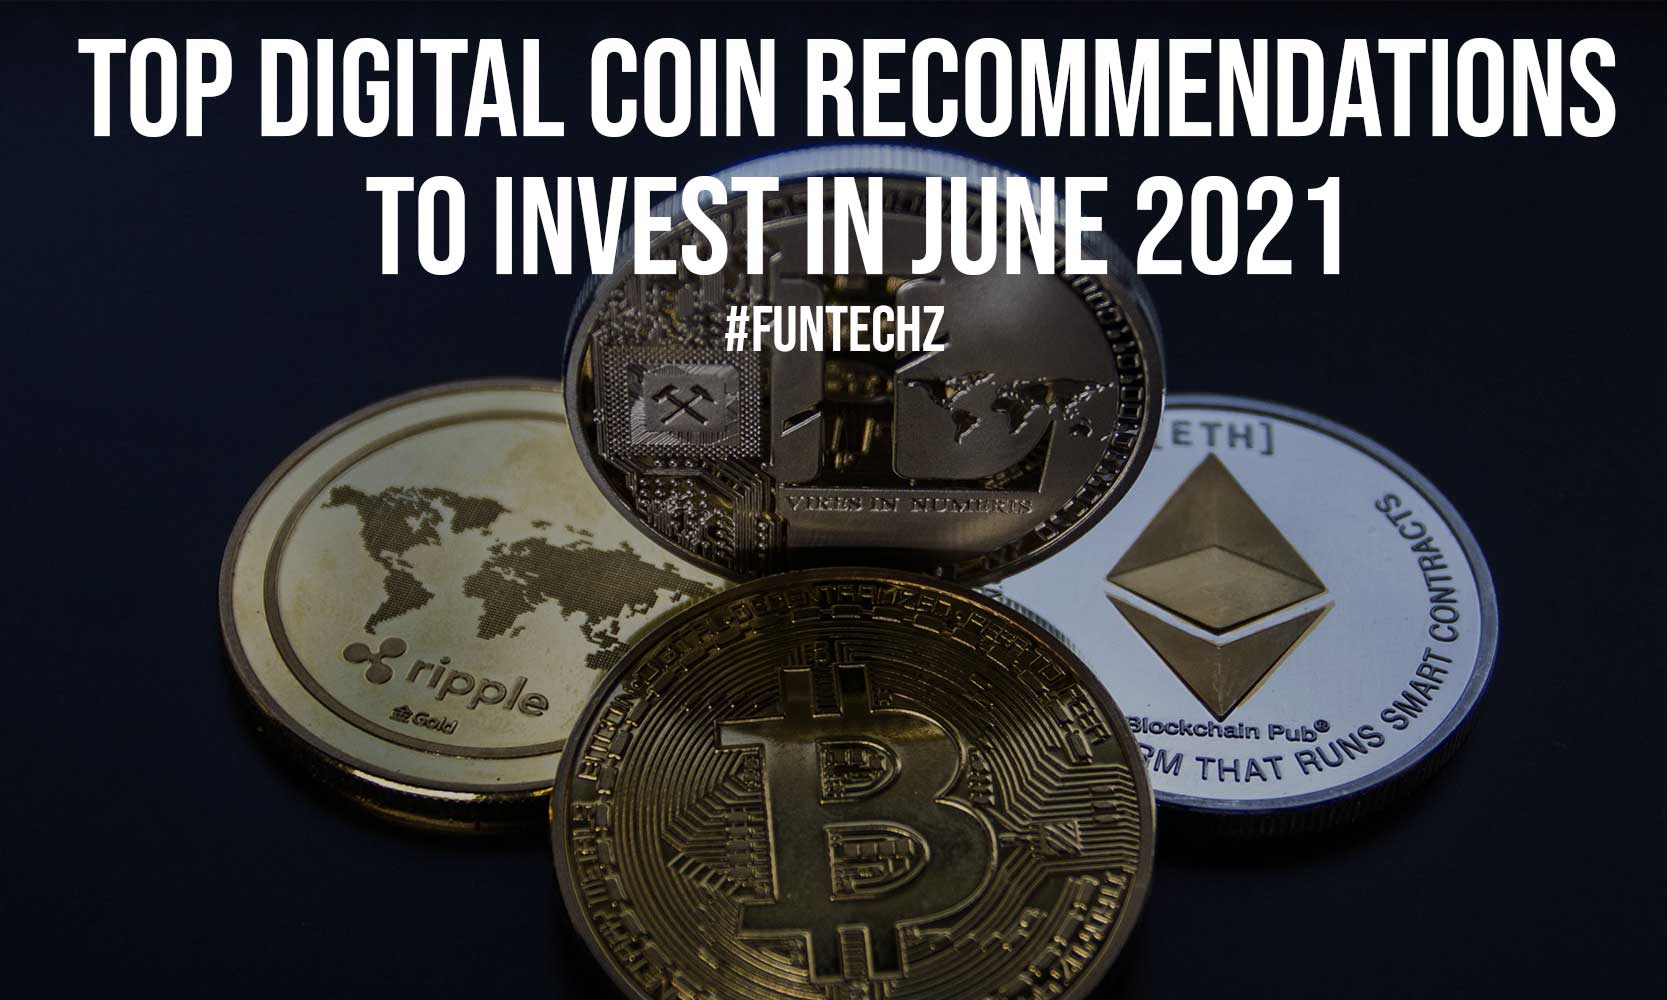 Top Digital Coin Recommendations to Invest in JUNE 2021